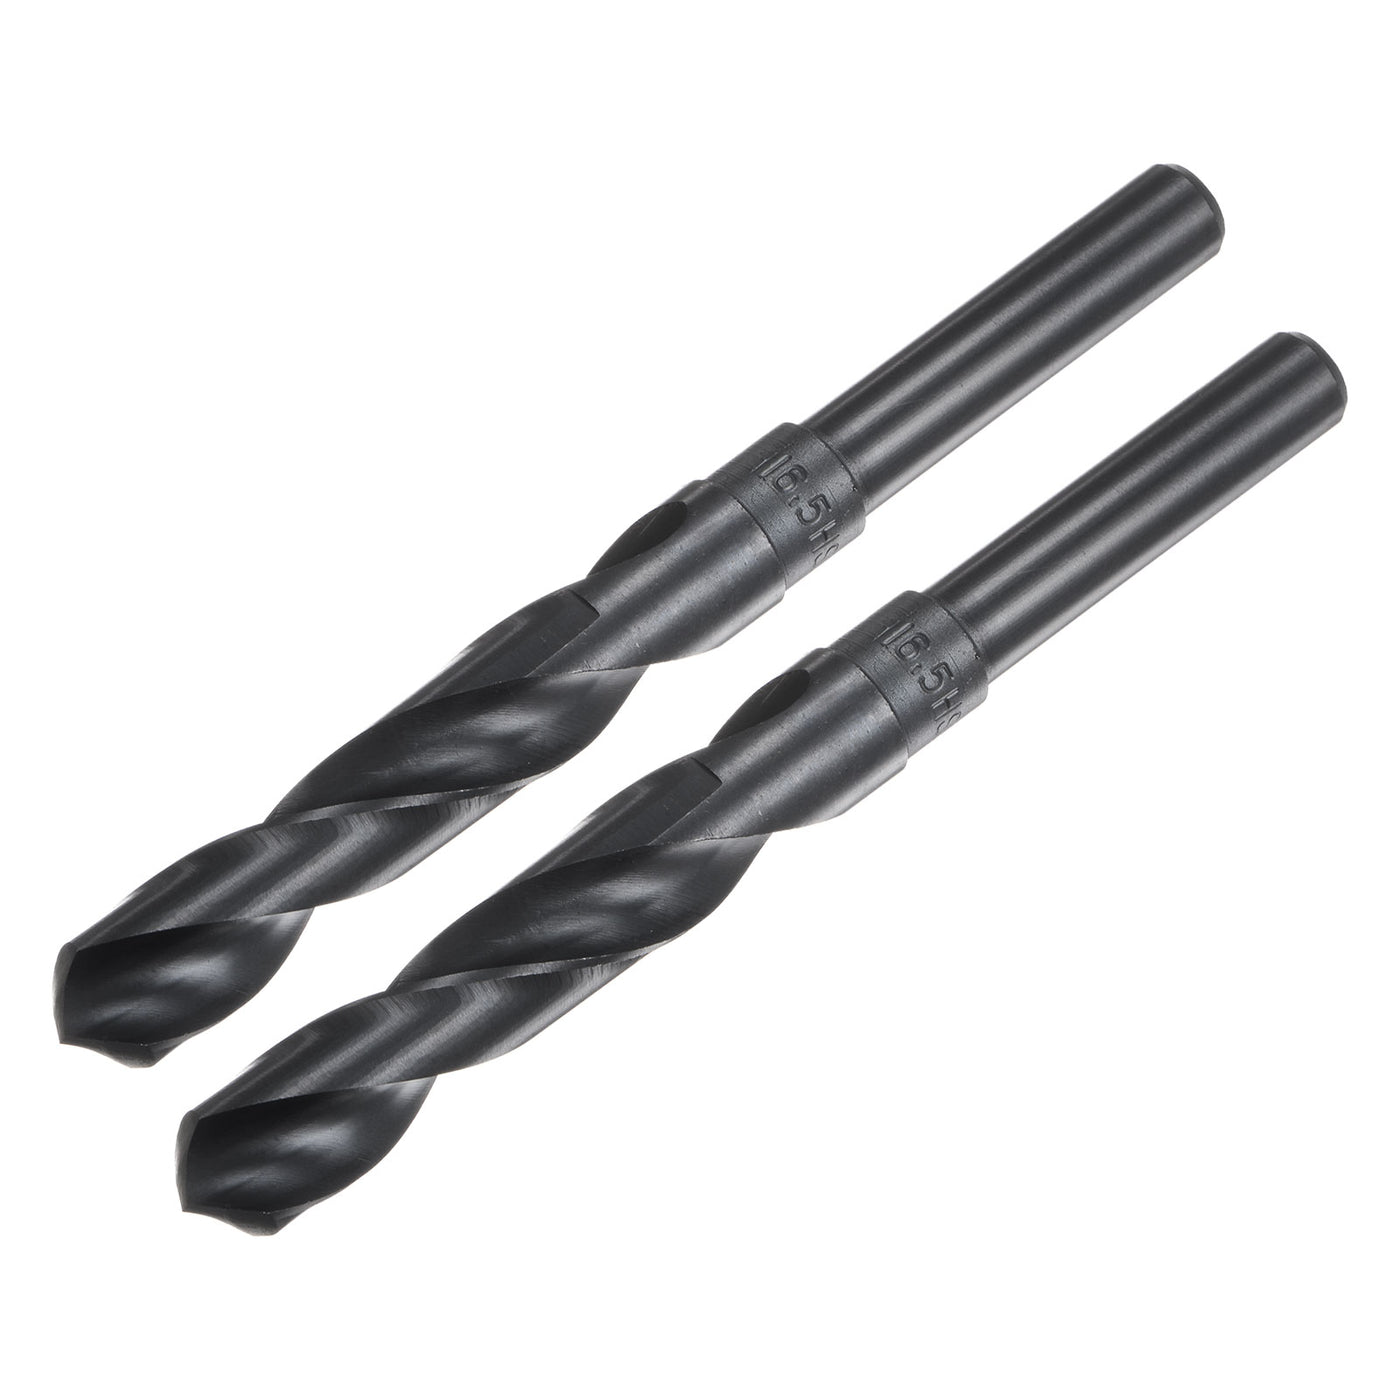 uxcell Uxcell 2pcs 16.5mm Black Oxide M2-6542 High Speed Steel 1/2" Reduced Shank Drill Bit